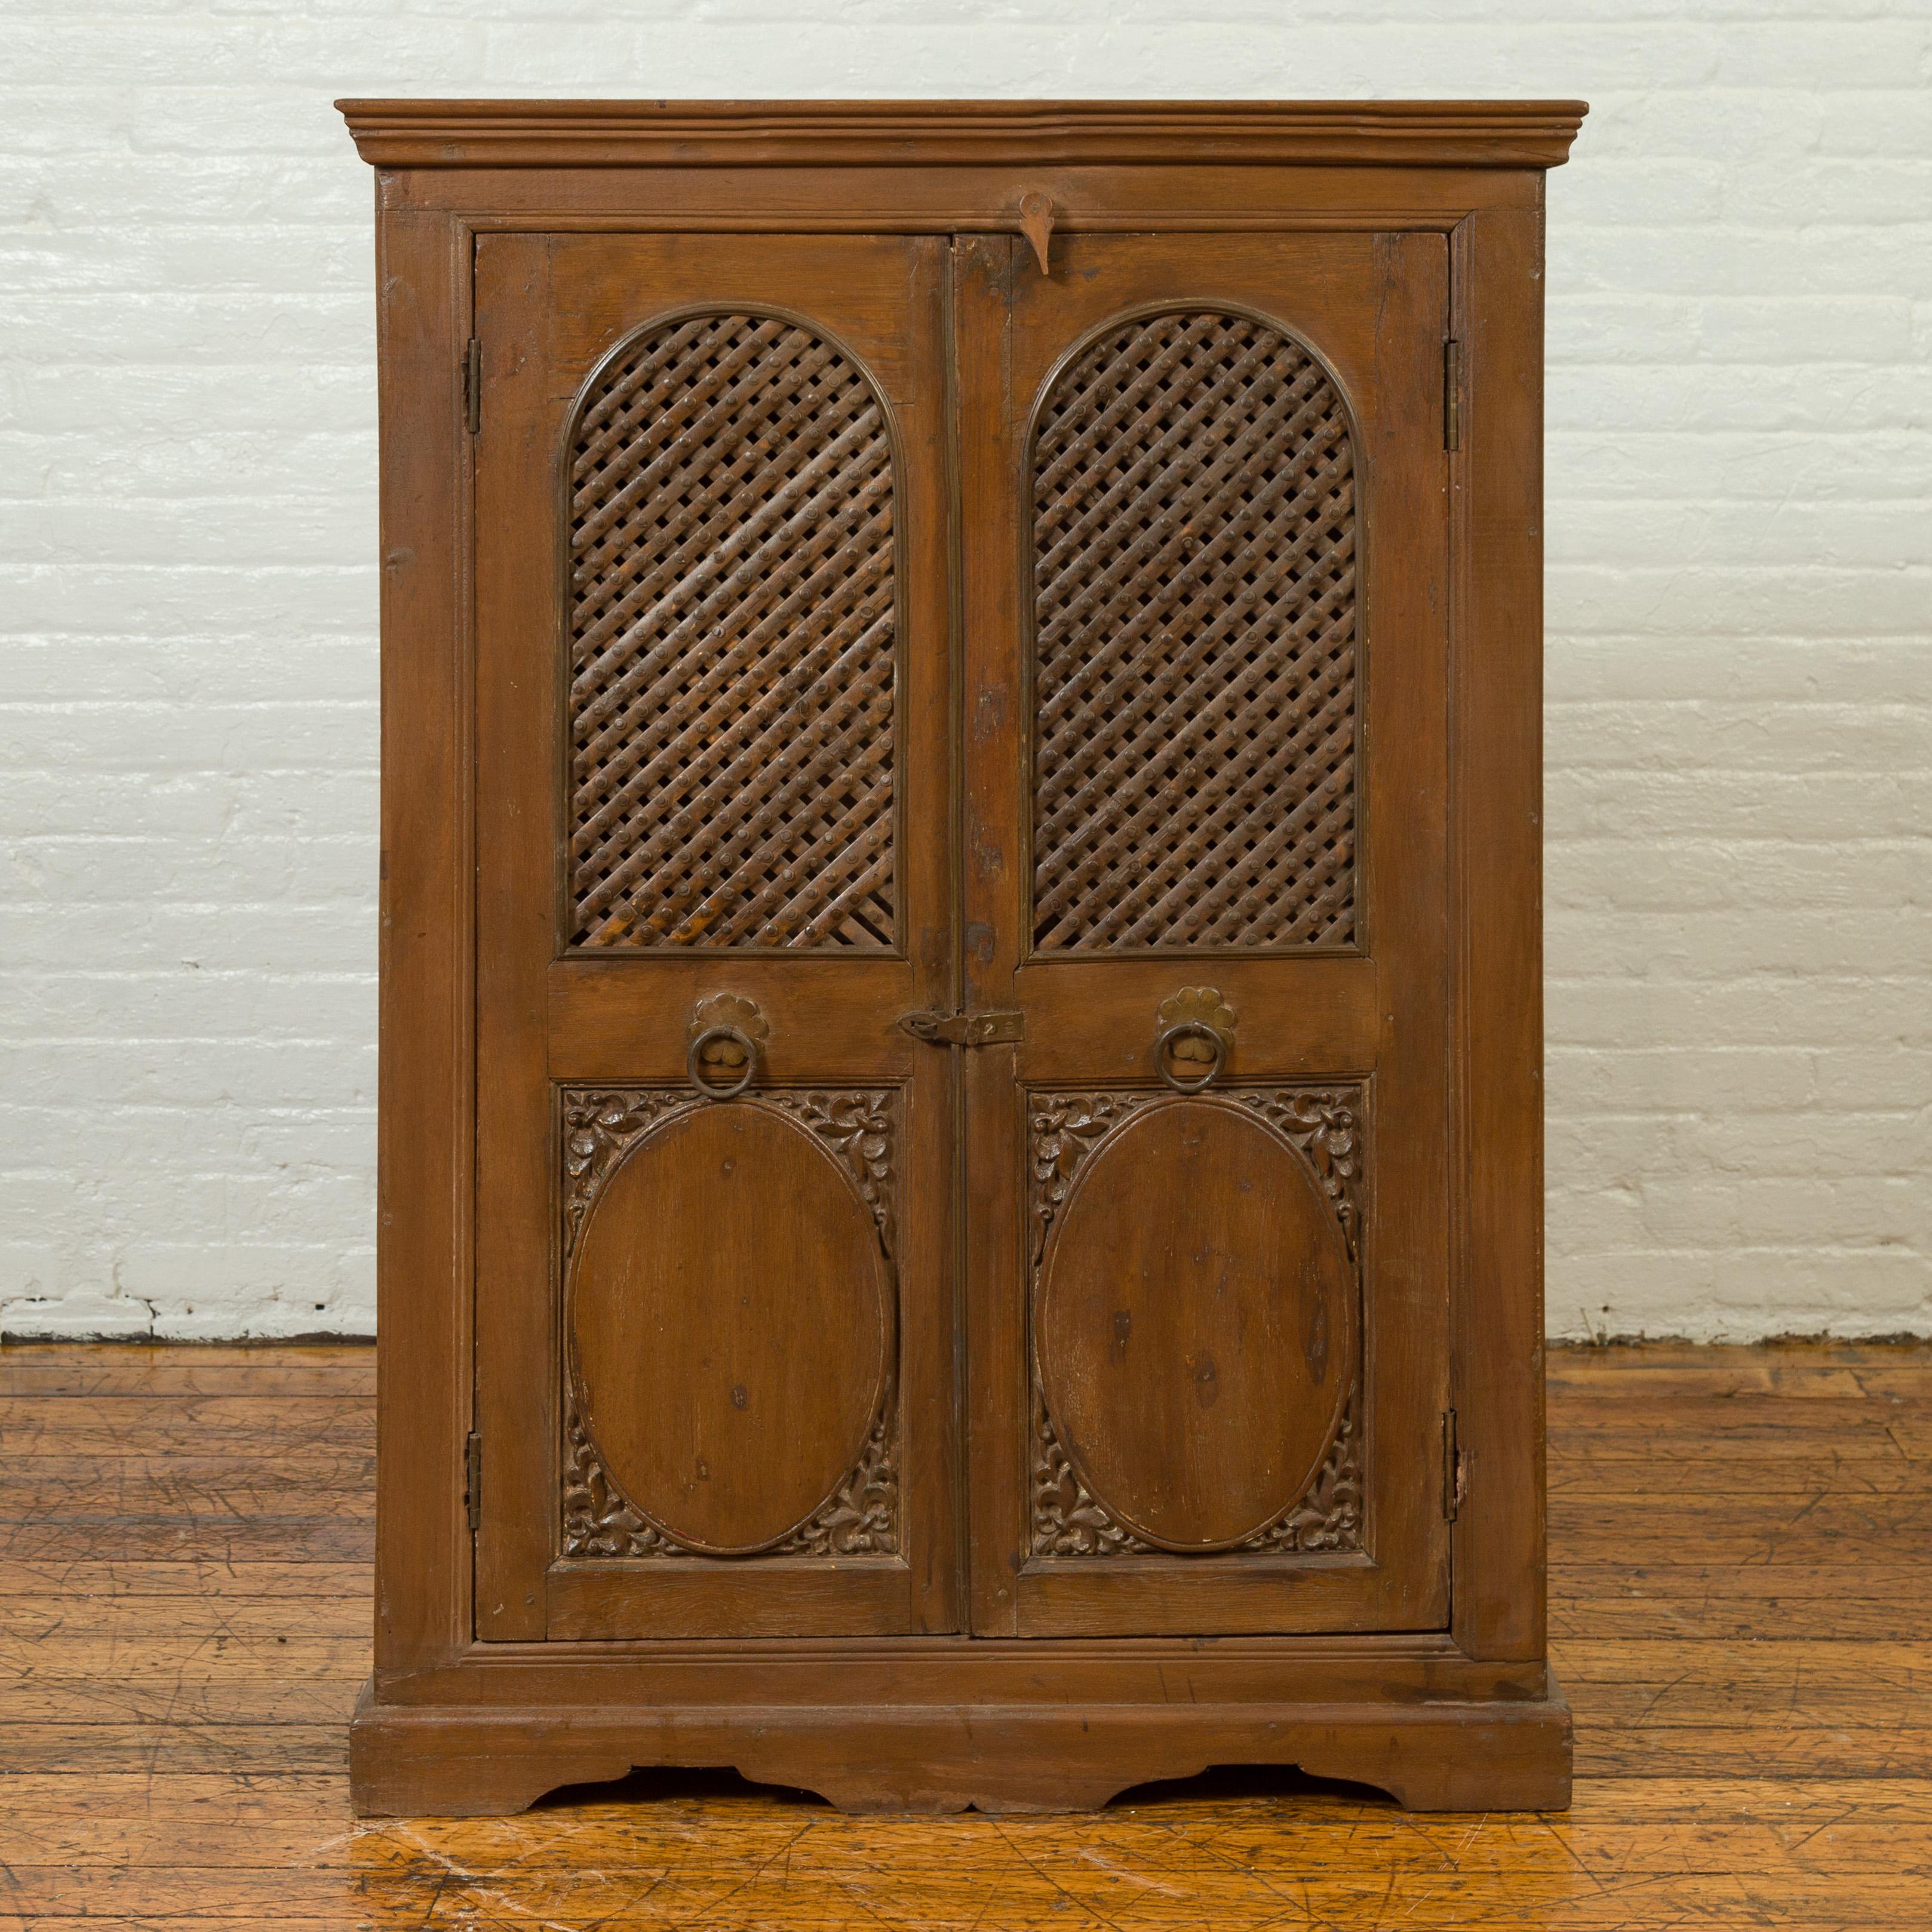 An Indian wooden kitchen cabinet from the 19th century, with metal fretwork motifs and oval medallions. Crafted in India during the 19th century, this kitchen cabinet features a molded cornice sitting above two large doors, adorned with metal